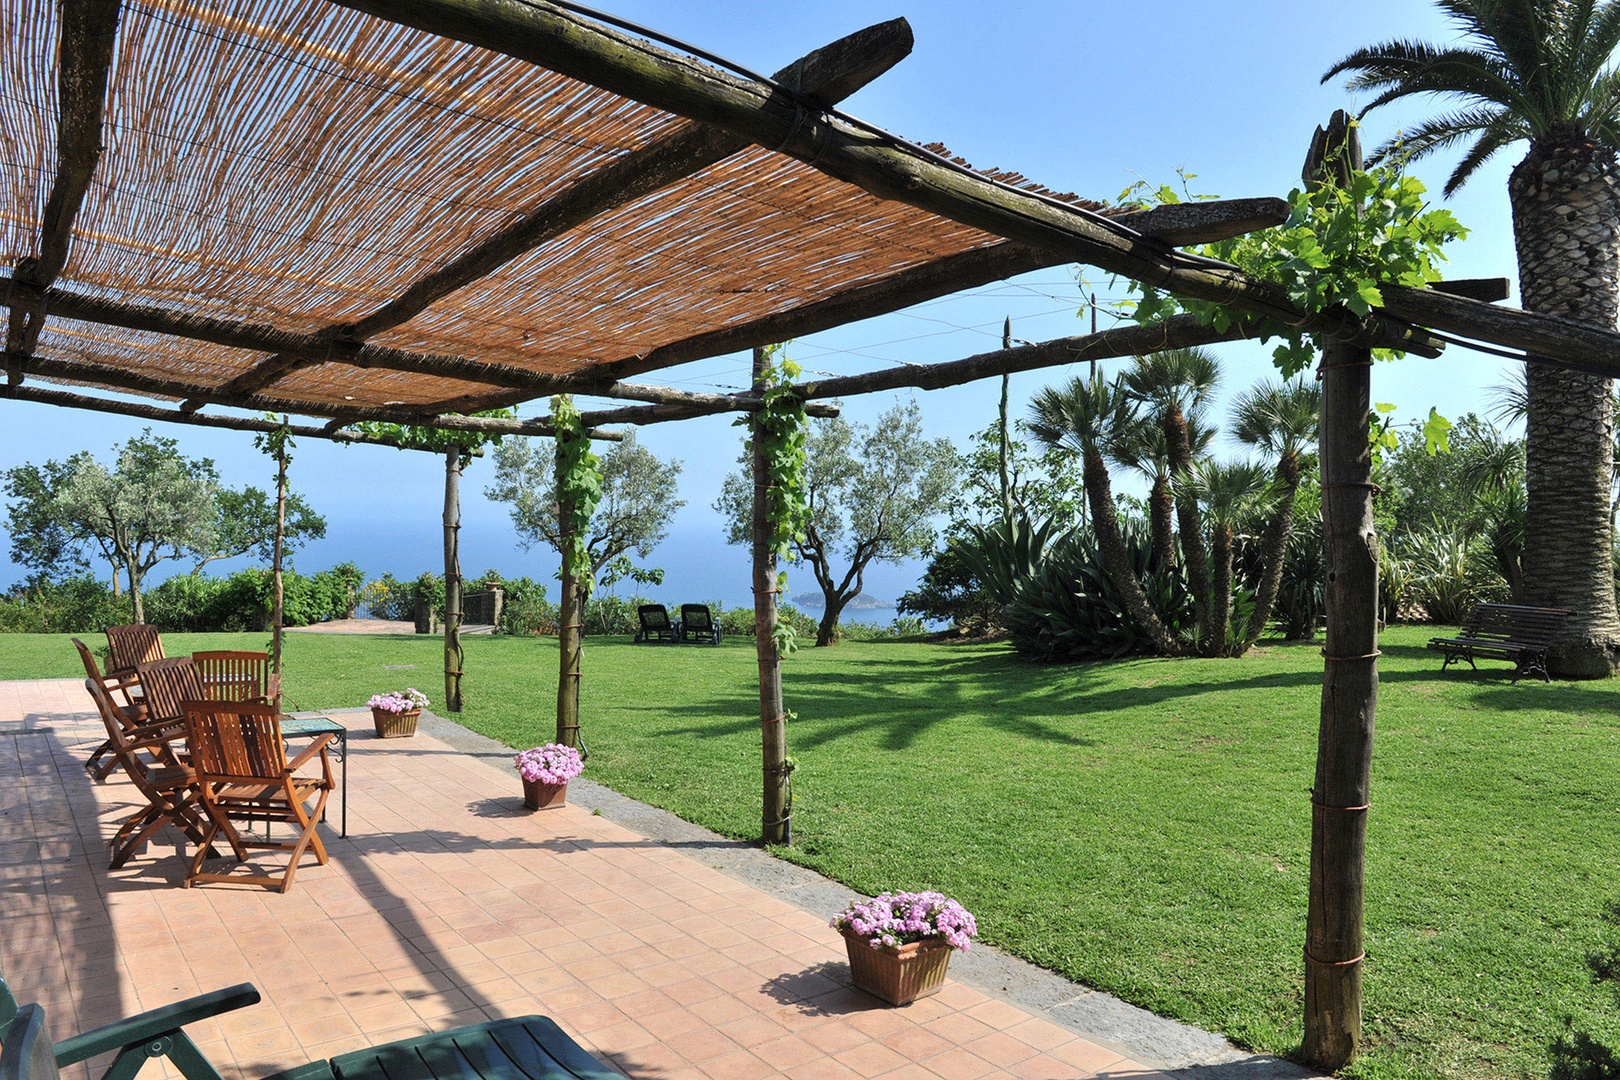 Villa Serena offers many places to relax or congregate like this large covered terrace in front.